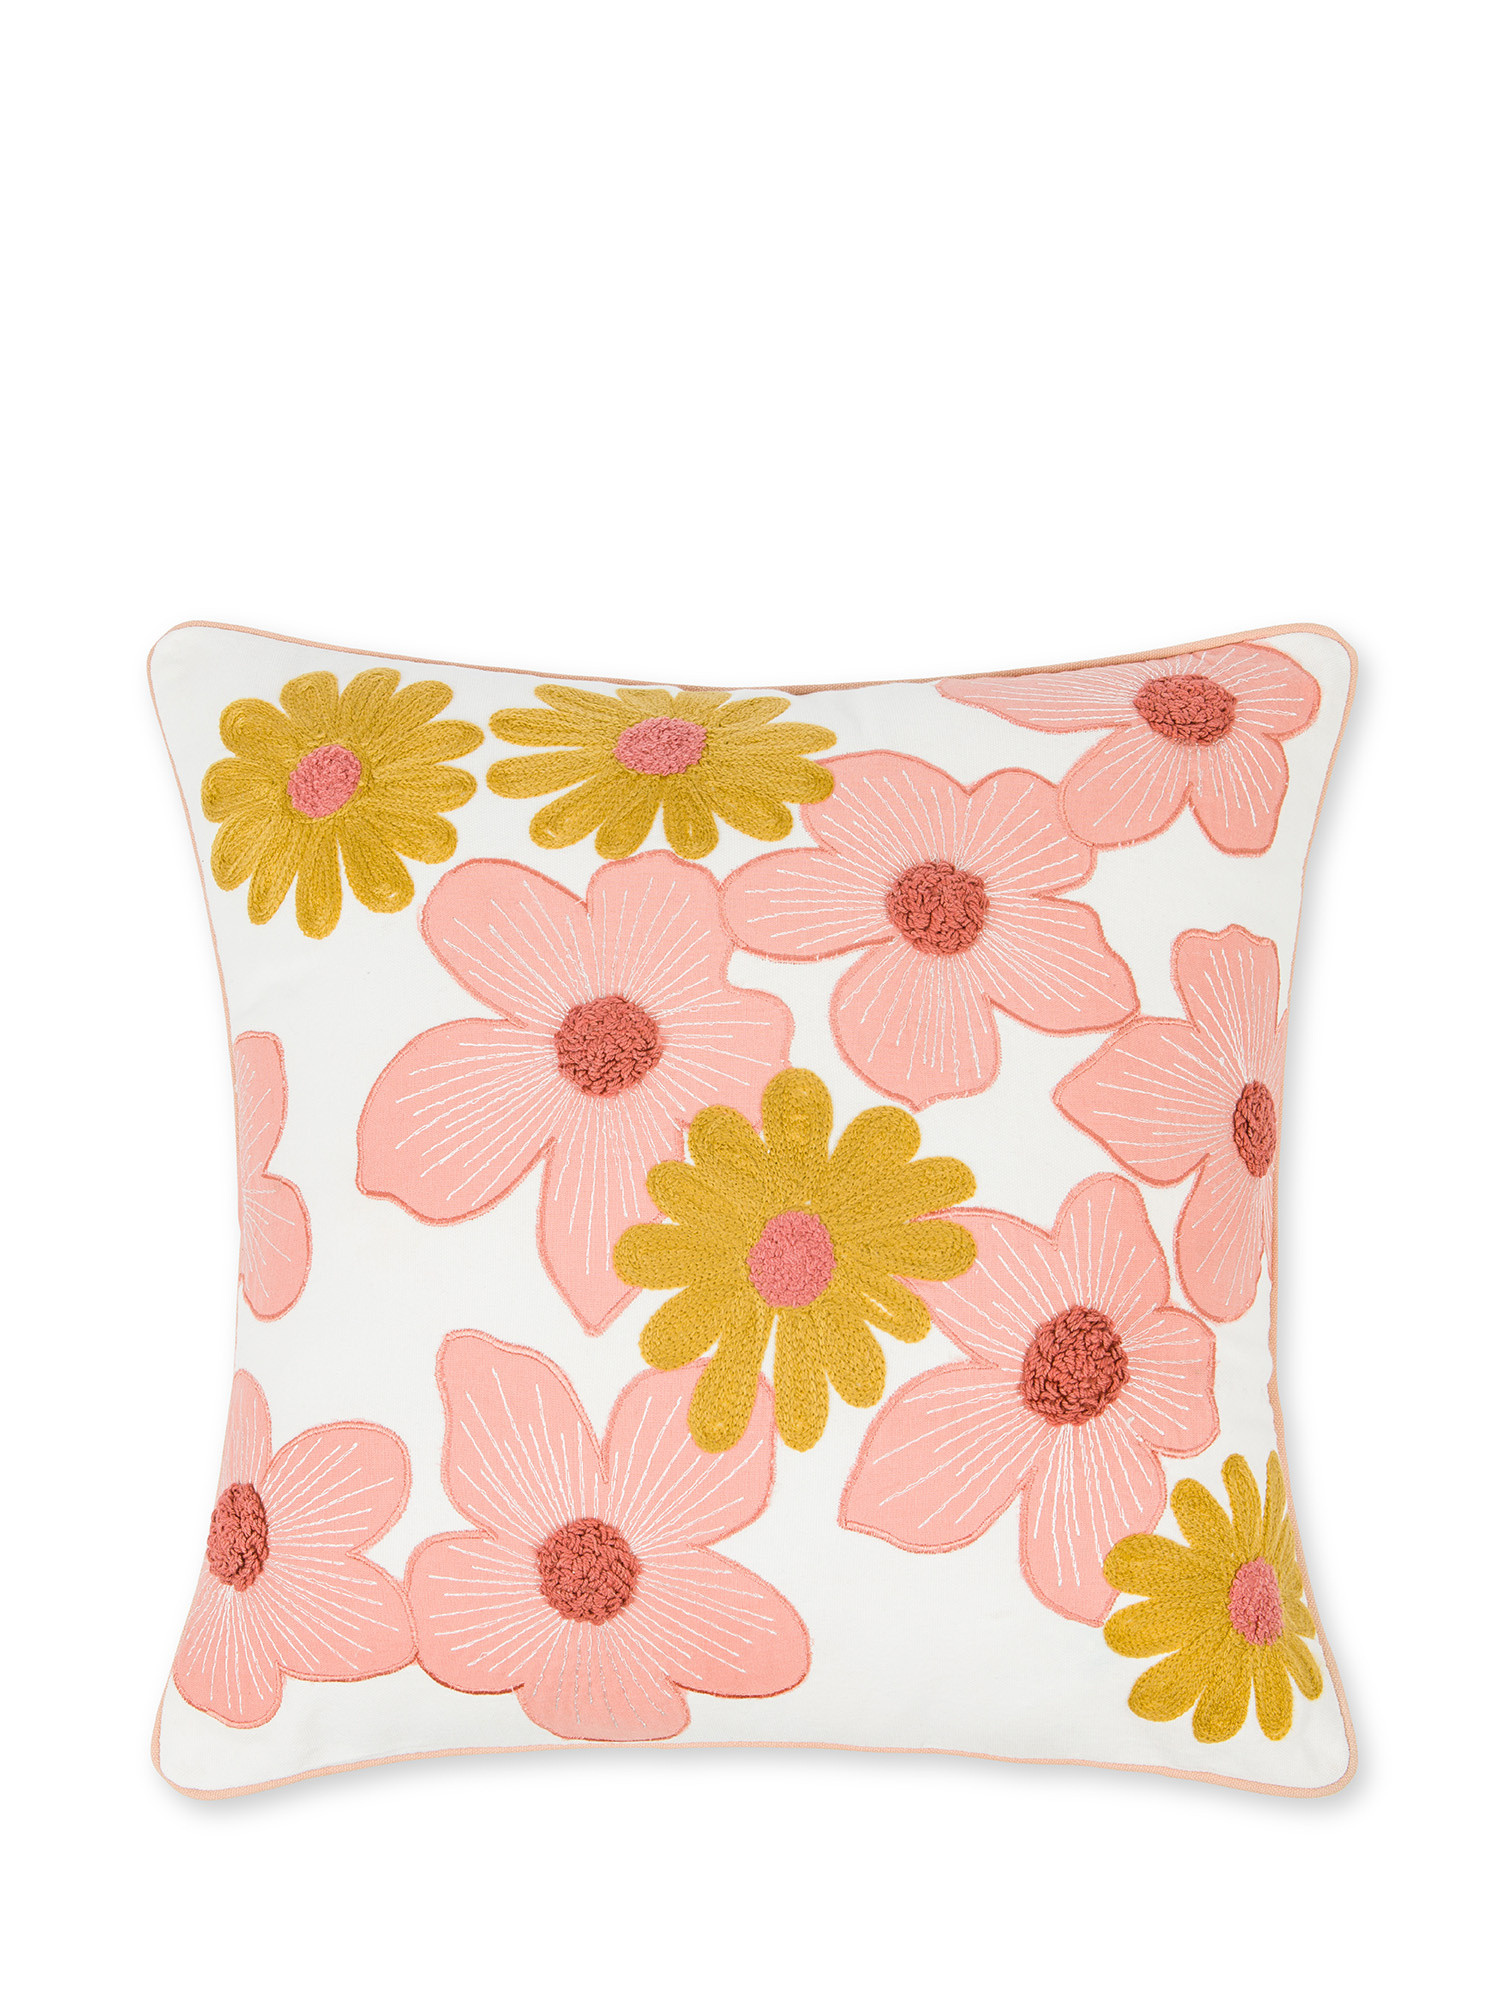 Flower embroidery cushion 45X45cm, White, large image number 0